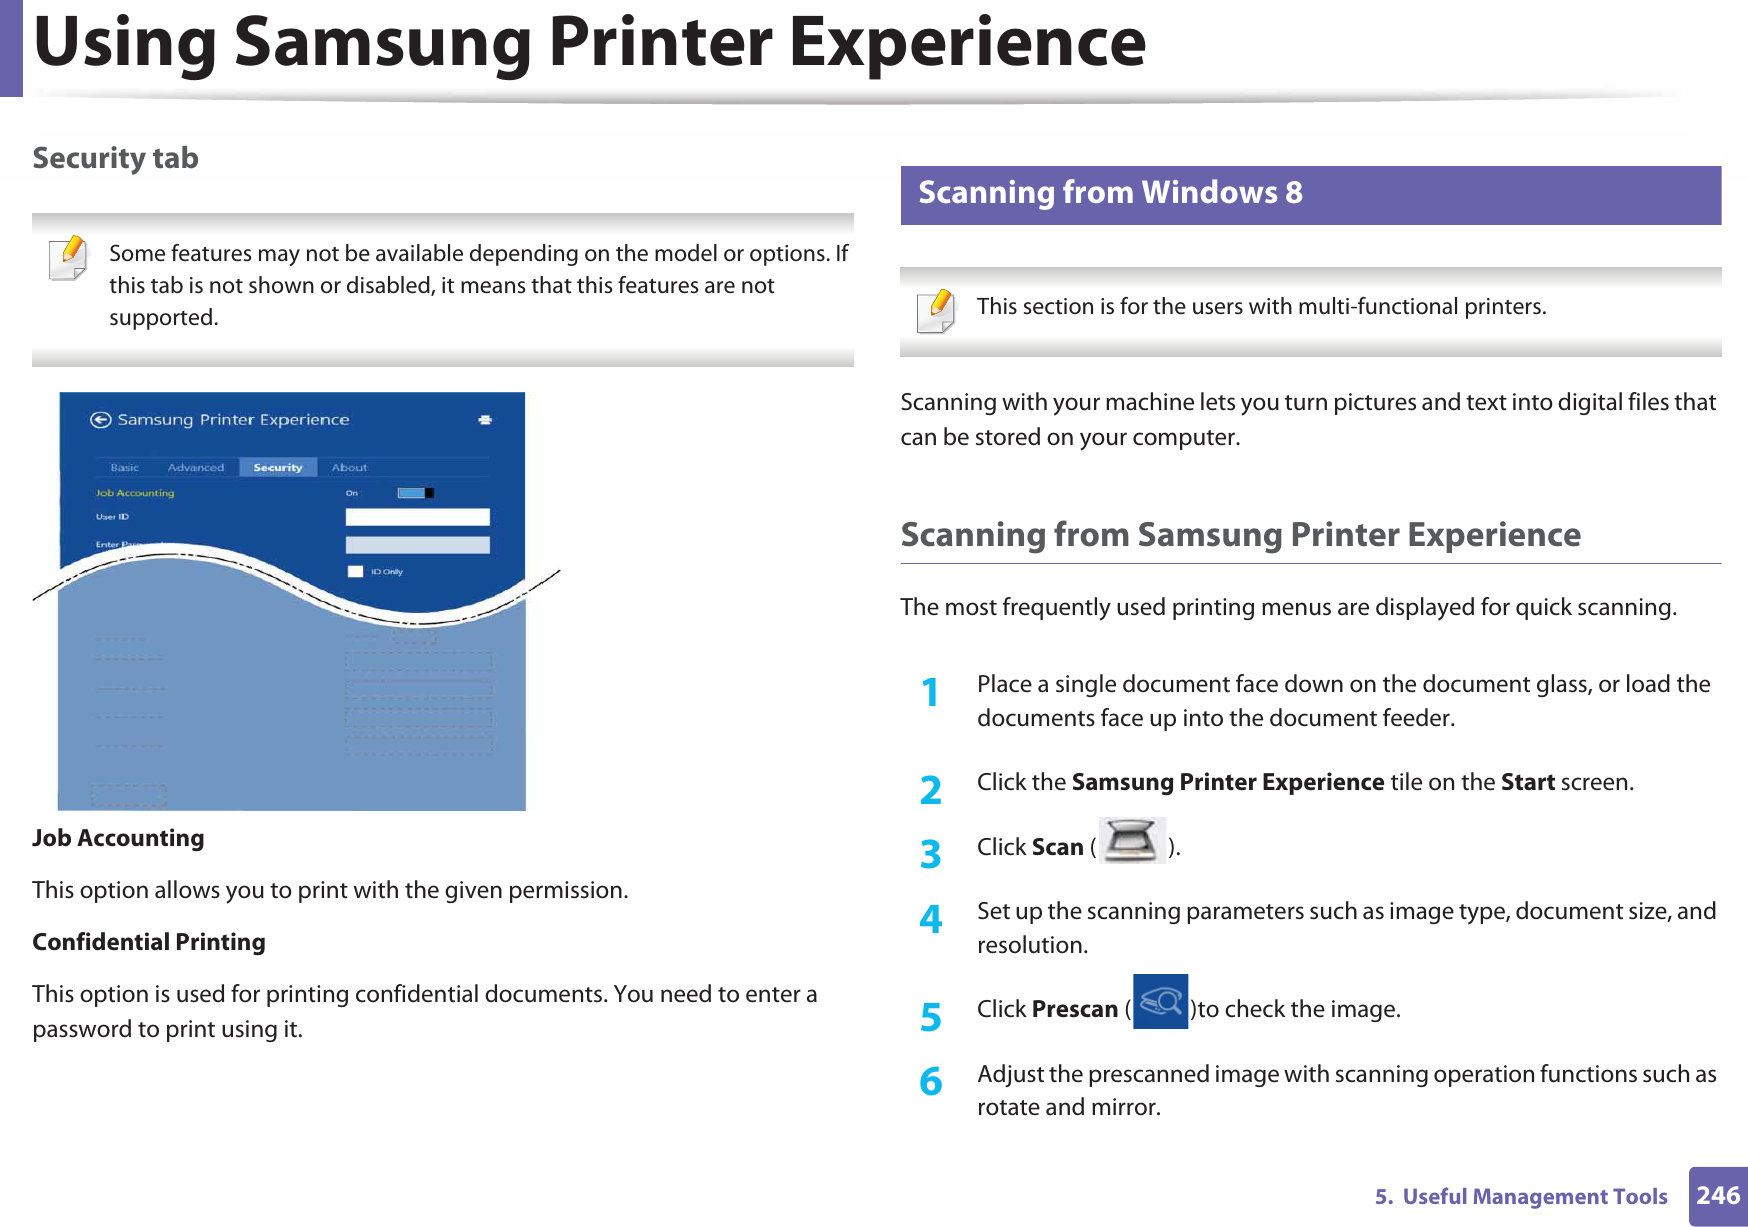 Using Samsung Printer Experience2465.  Useful Management ToolsSecurity tab Some features may not be available depending on the model or options. If this tab is not shown or disabled, it means that this features are not supported. Job AccountingThis option allows you to print with the given permission.Confidential PrintingThis option is used for printing confidential documents. You need to enter a password to print using it.10 Scanning from Windows 8 This section is for the users with multi-functional printers. Scanning with your machine lets you turn pictures and text into digital files that can be stored on your computer.Scanning from Samsung Printer ExperienceThe most frequently used printing menus are displayed for quick scanning.1Place a single document face down on the document glass, or load the documents face up into the document feeder.2  Click the Samsung Printer Experience tile on the Start screen.3  Click Scan ().4  Set up the scanning parameters such as image type, document size, and resolution.5  Click Prescan ( )to check the image.6  Adjust the prescanned image with scanning operation functions such as rotate and mirror.